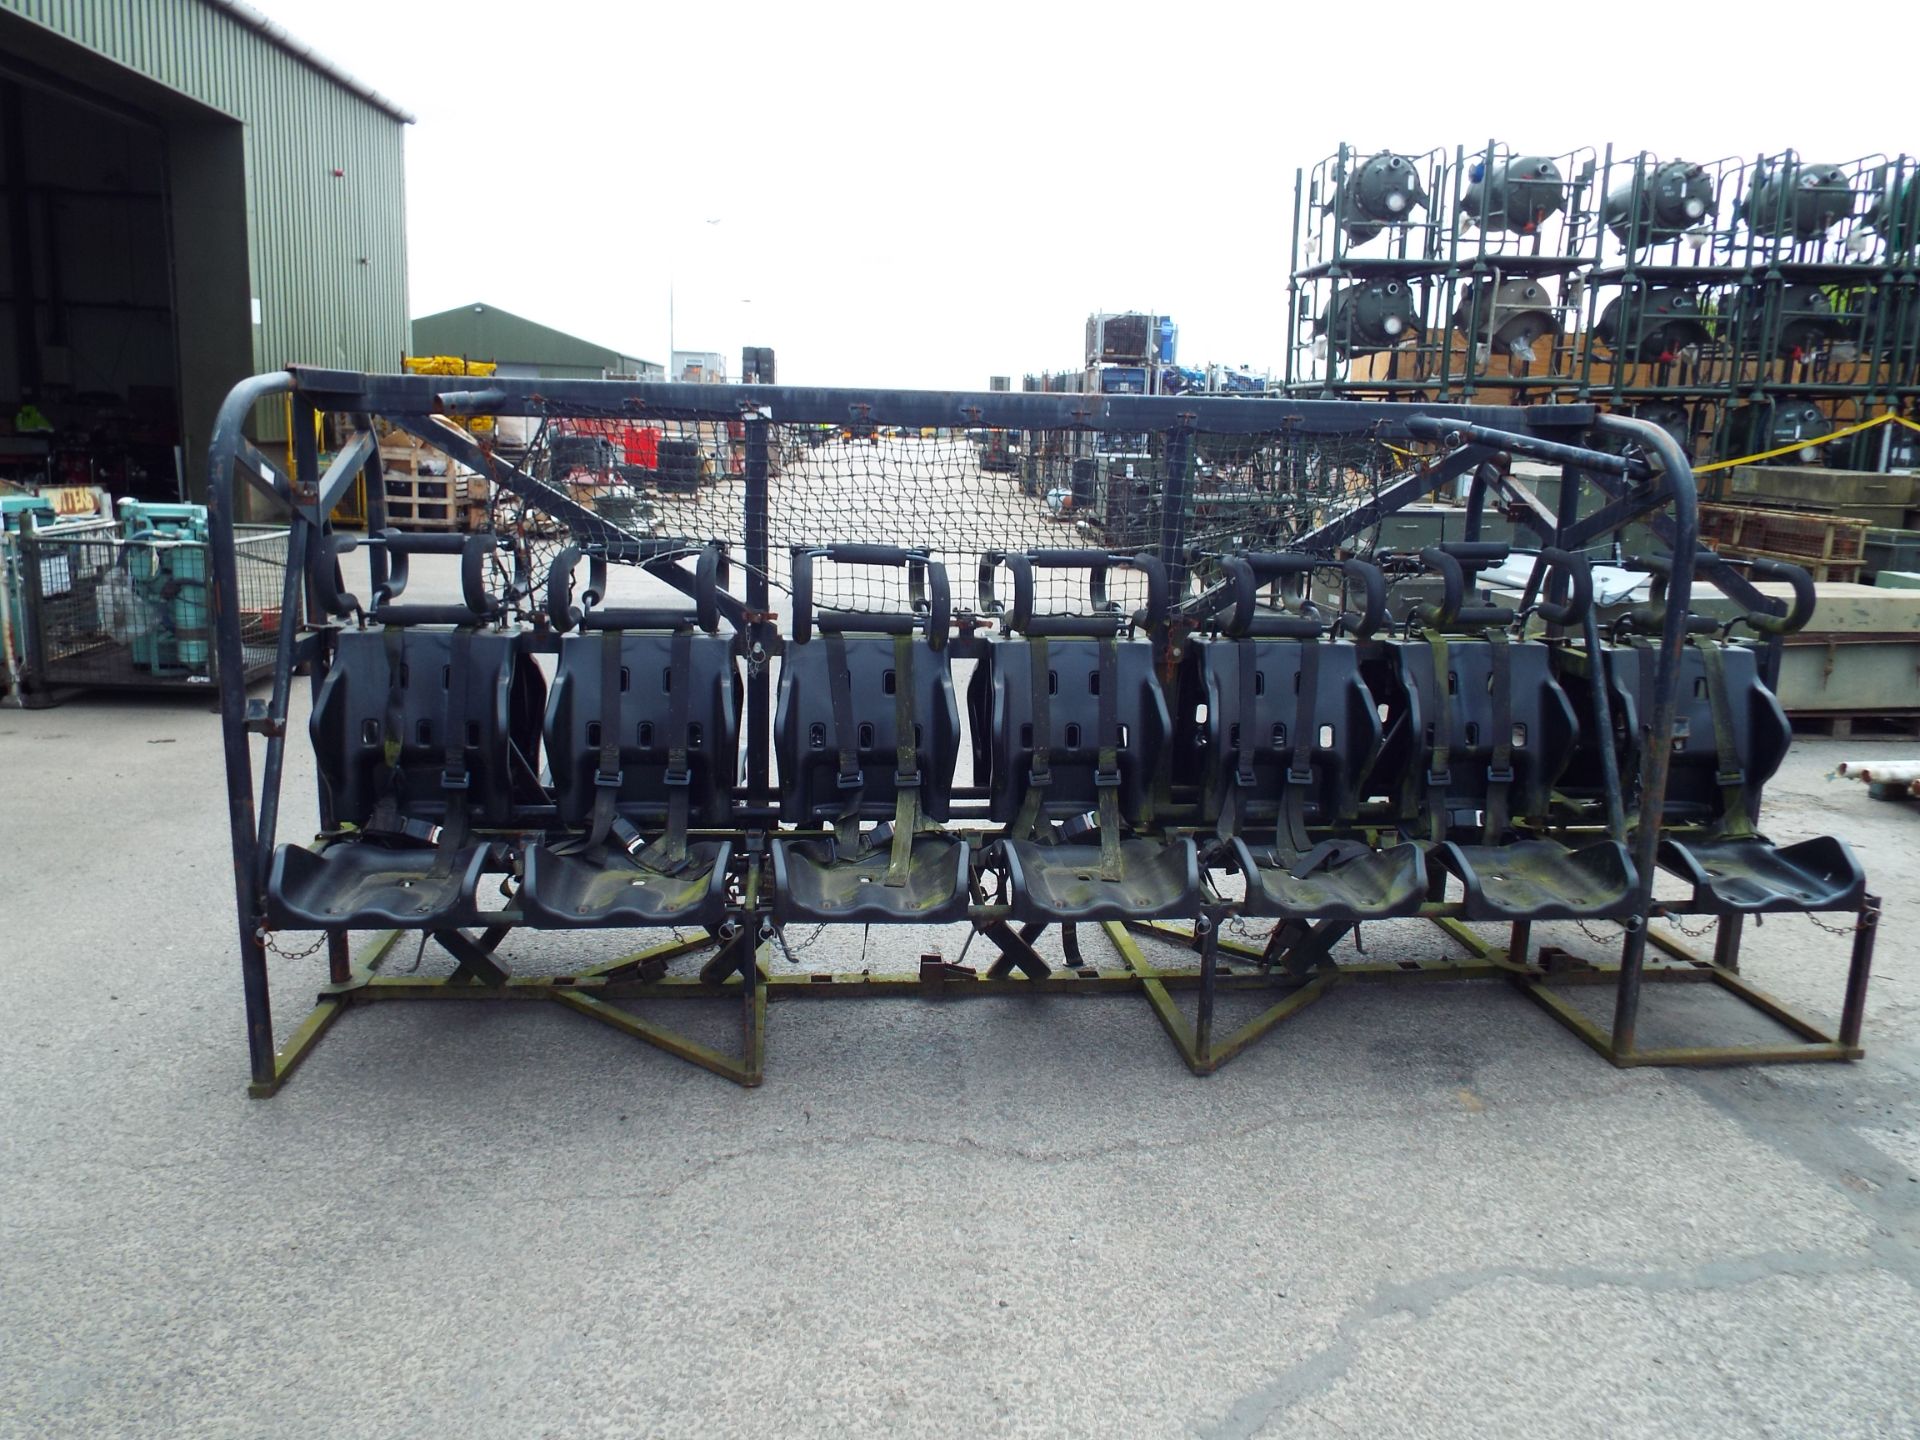 14 Man Security Seat suitable for Leyland Dafs, Bedfords etc - Image 4 of 7